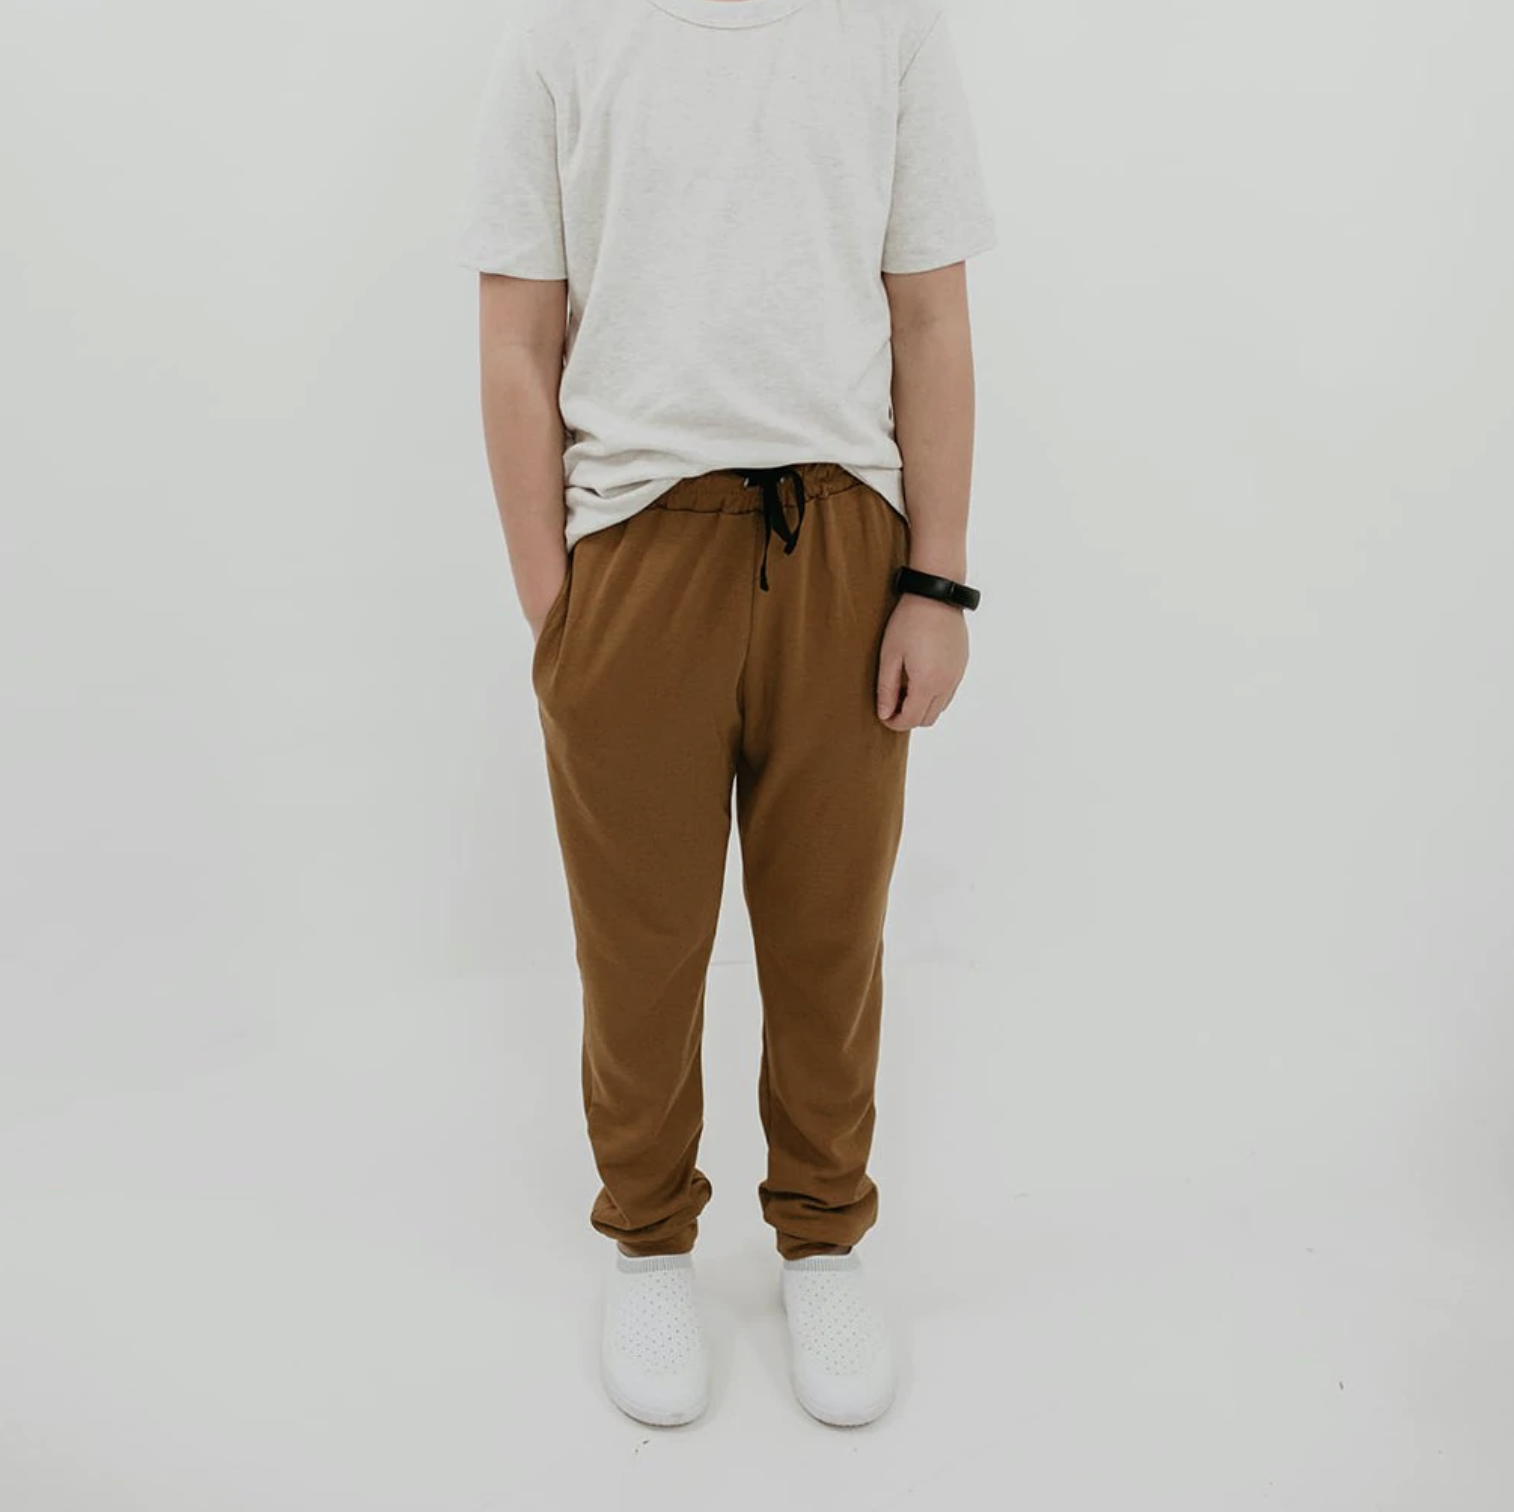 A kid wearing the joggers and a tee